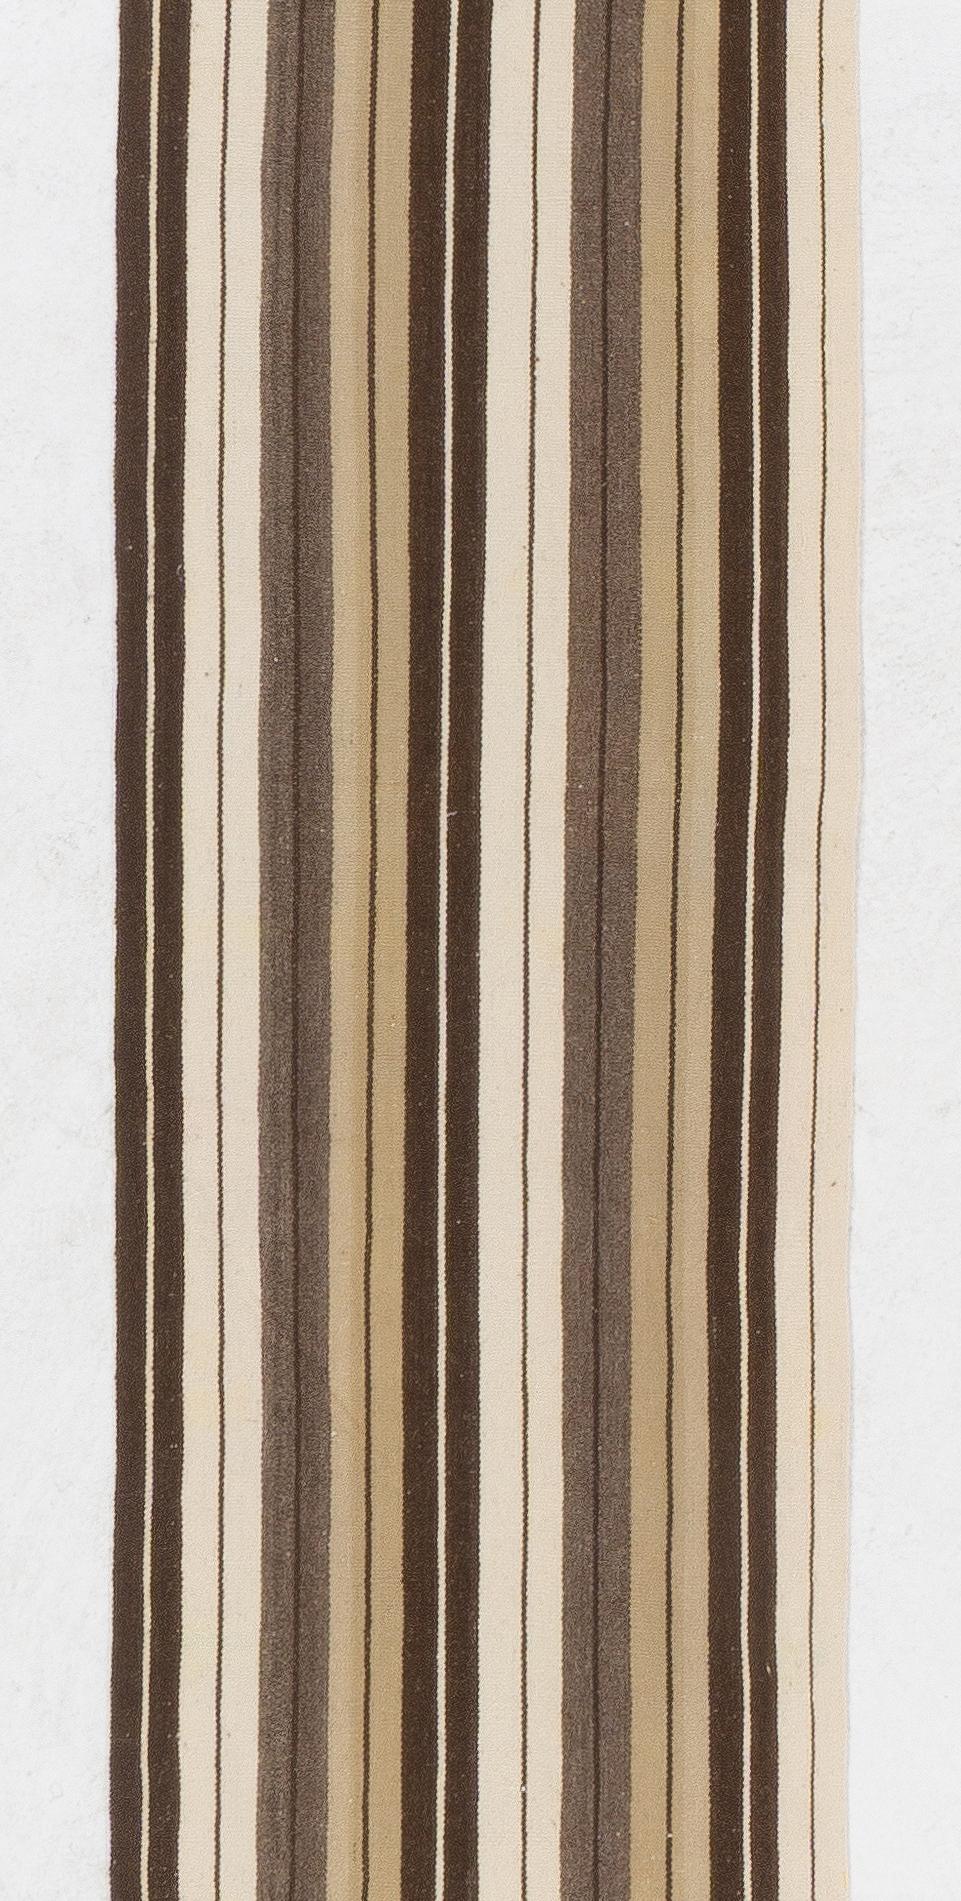 Hand-Woven 2x26 Ft (Adjustable) Striped Turkish Runner Kilim, Narrow and Long Hallway Rug For Sale